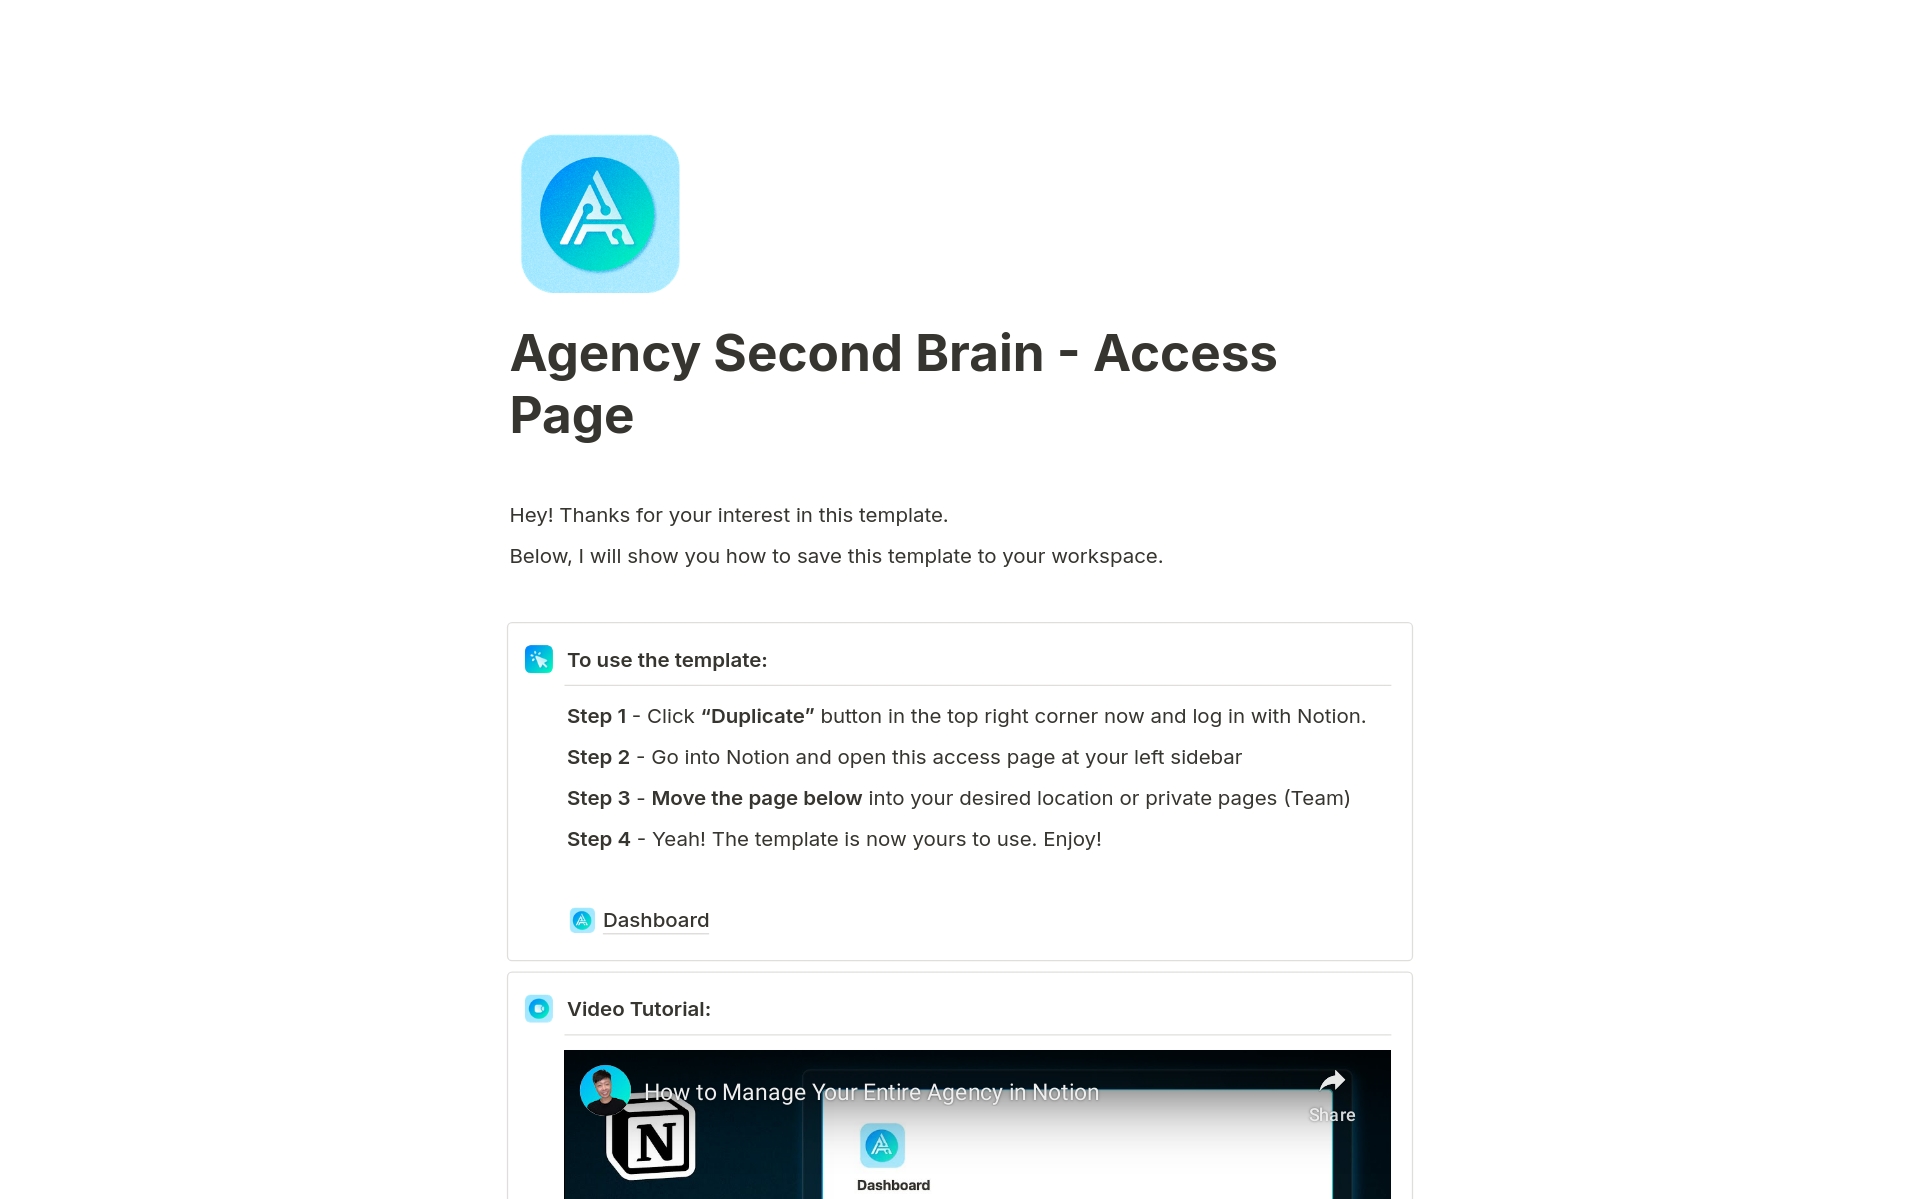 Revolutionize agency operations with Agency Second Brain, an all-in-one customizable system.